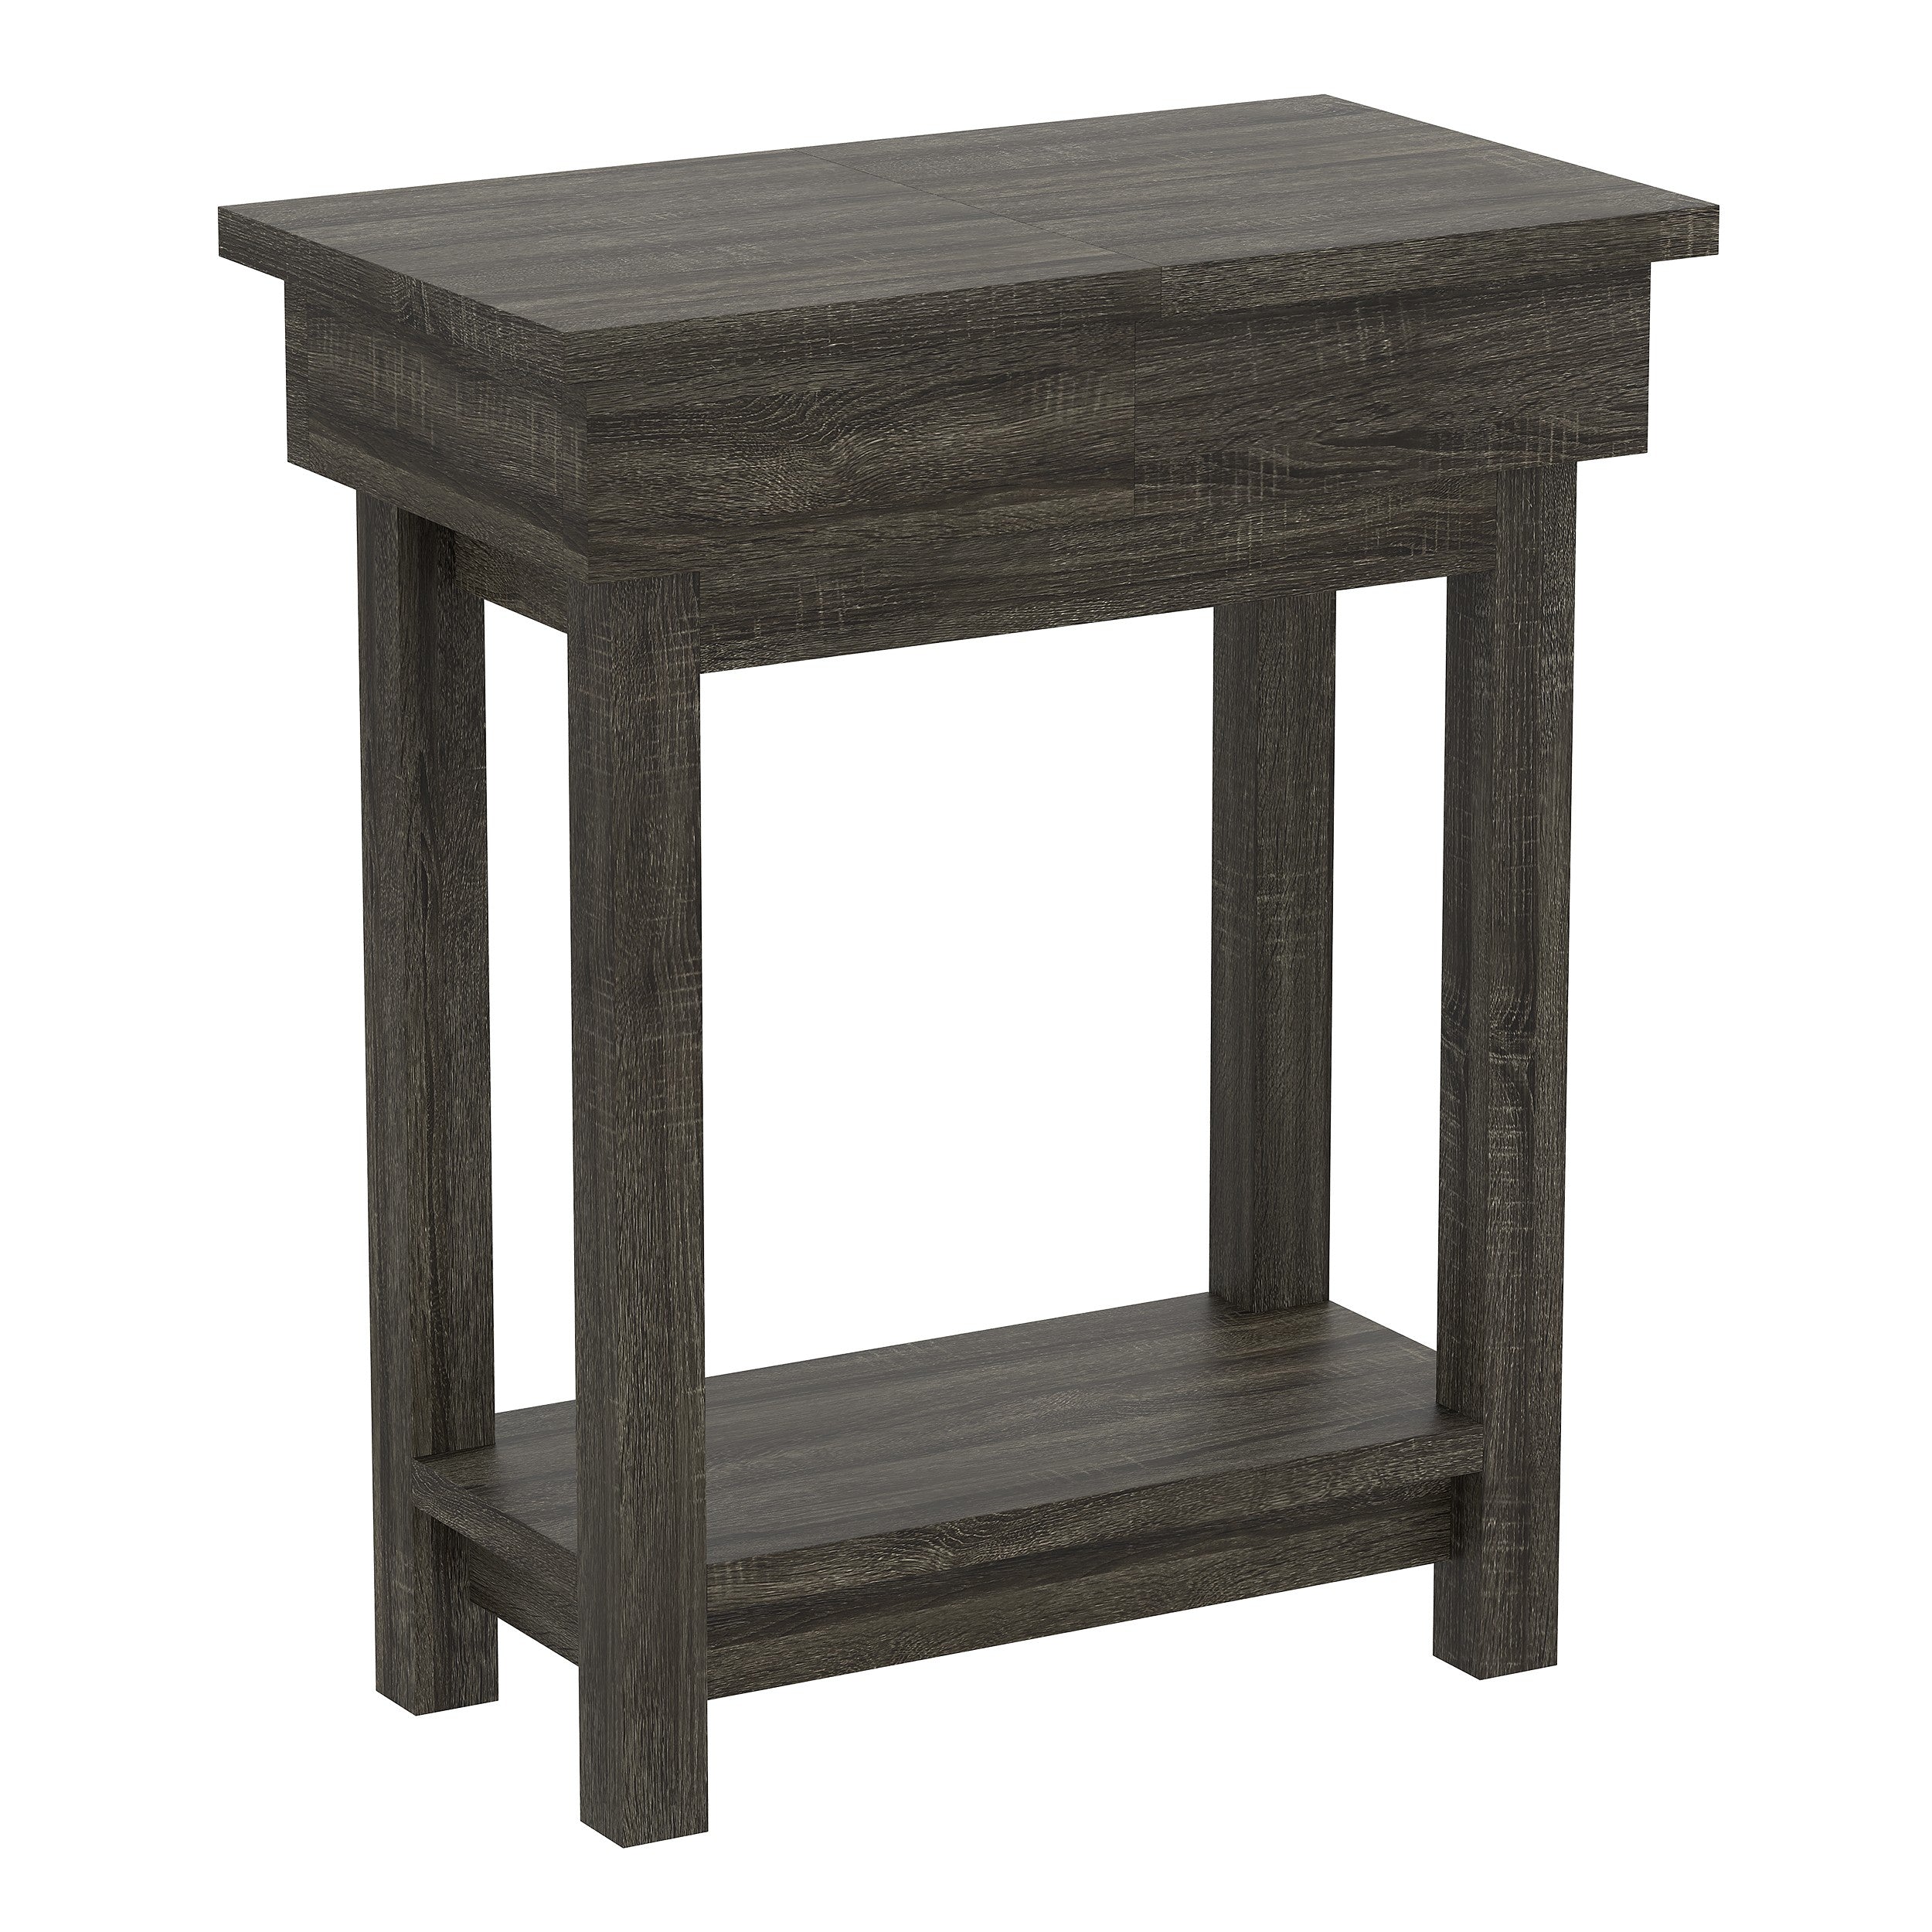 title:Safdie & Co. Accent Table 20L Dark Grey Open Top Drawer;color:Grey